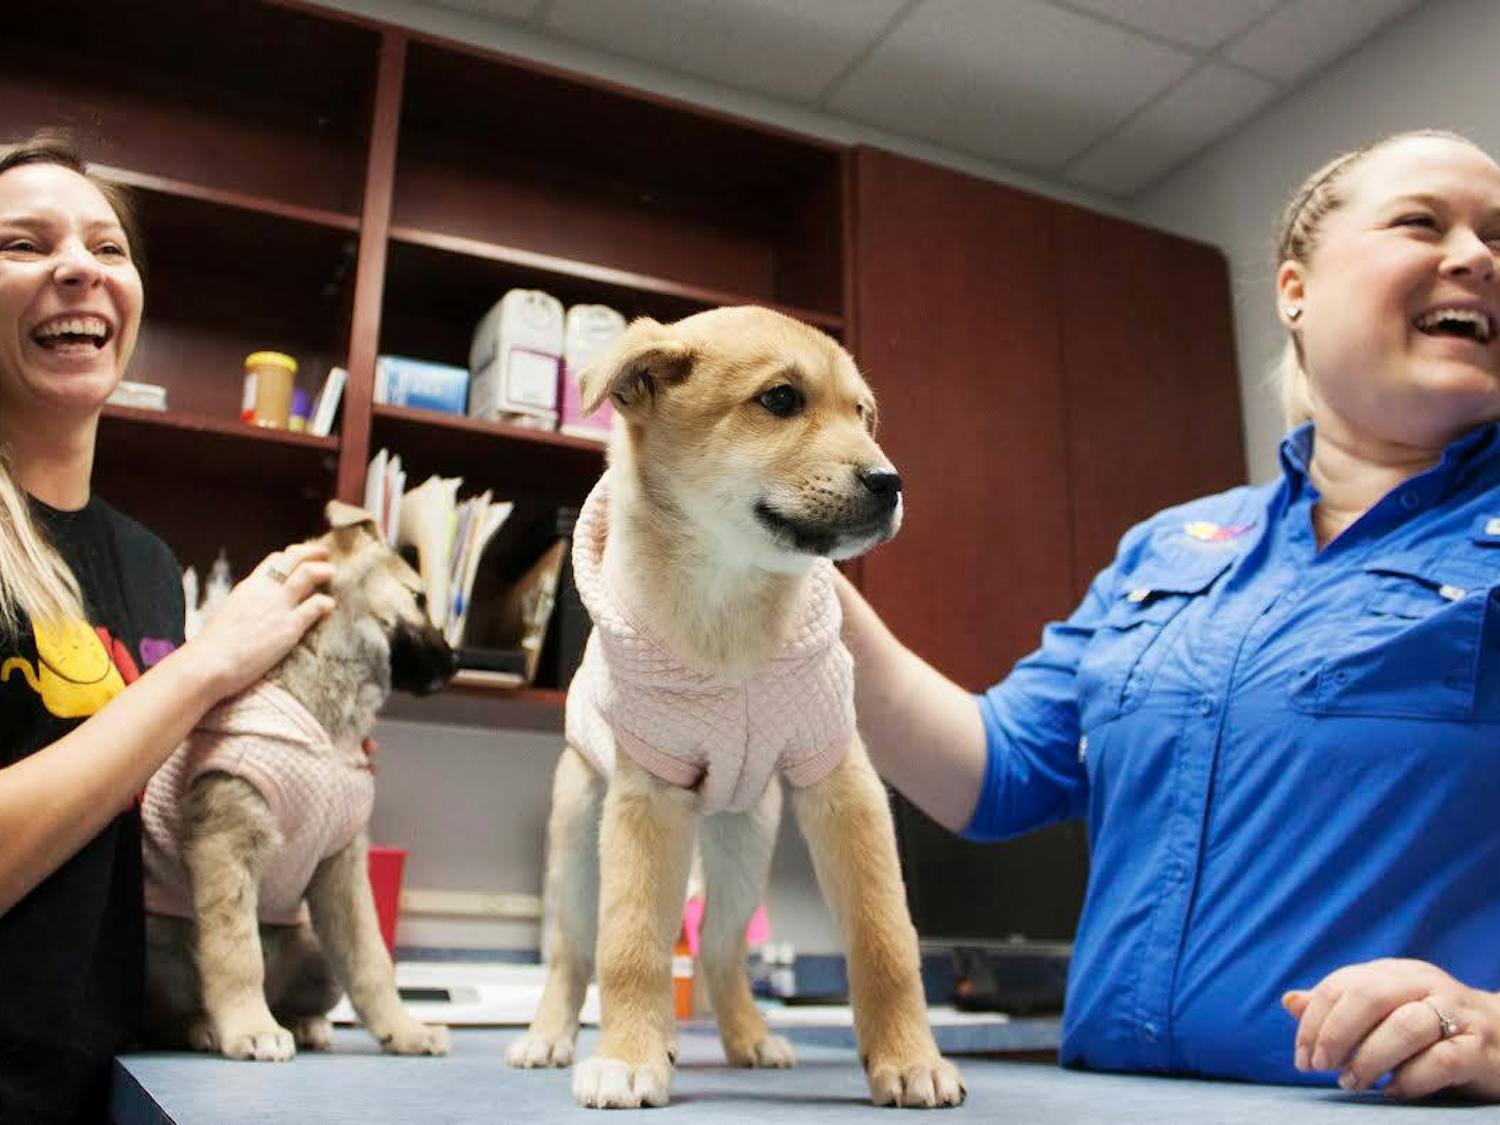 Chrissy Sedgley, the director of operations at the Alachua County Humane Society, and Margot DeConna, the director of development, hold Bernard and Louie, 3- to 4-month-old jindo mixes inside the examination rooms at the shelter on Jan 16. DeConna said, originally, she thought the two dogs might need time to be socialized before being adopted, but after seeing them, DeConna said the dogs might get adopted sooner. “I think they’re going to be highly, highly adoptable,” she said.